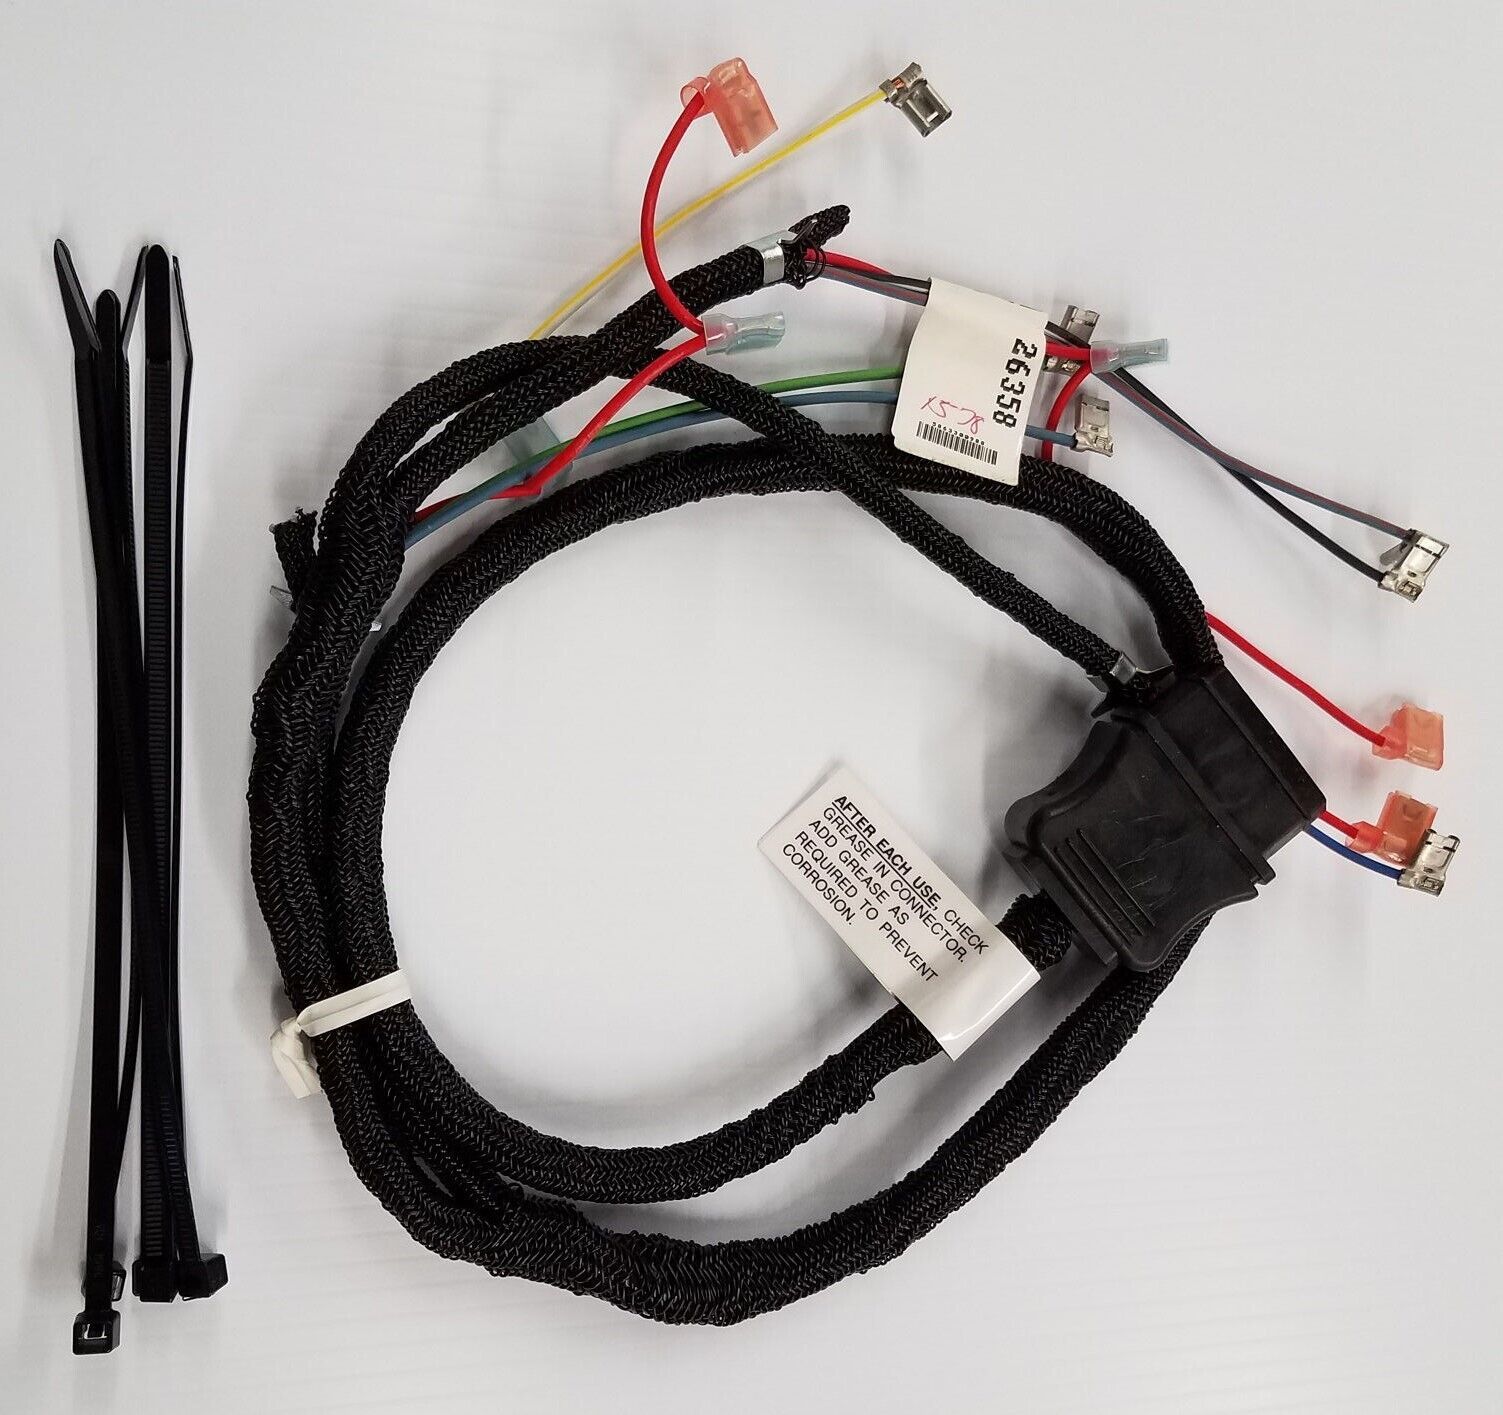 Primary image for Western Plow Part # 26358 - 7 Pin Plow Side Pump Plug Wiring Harness for V Plow